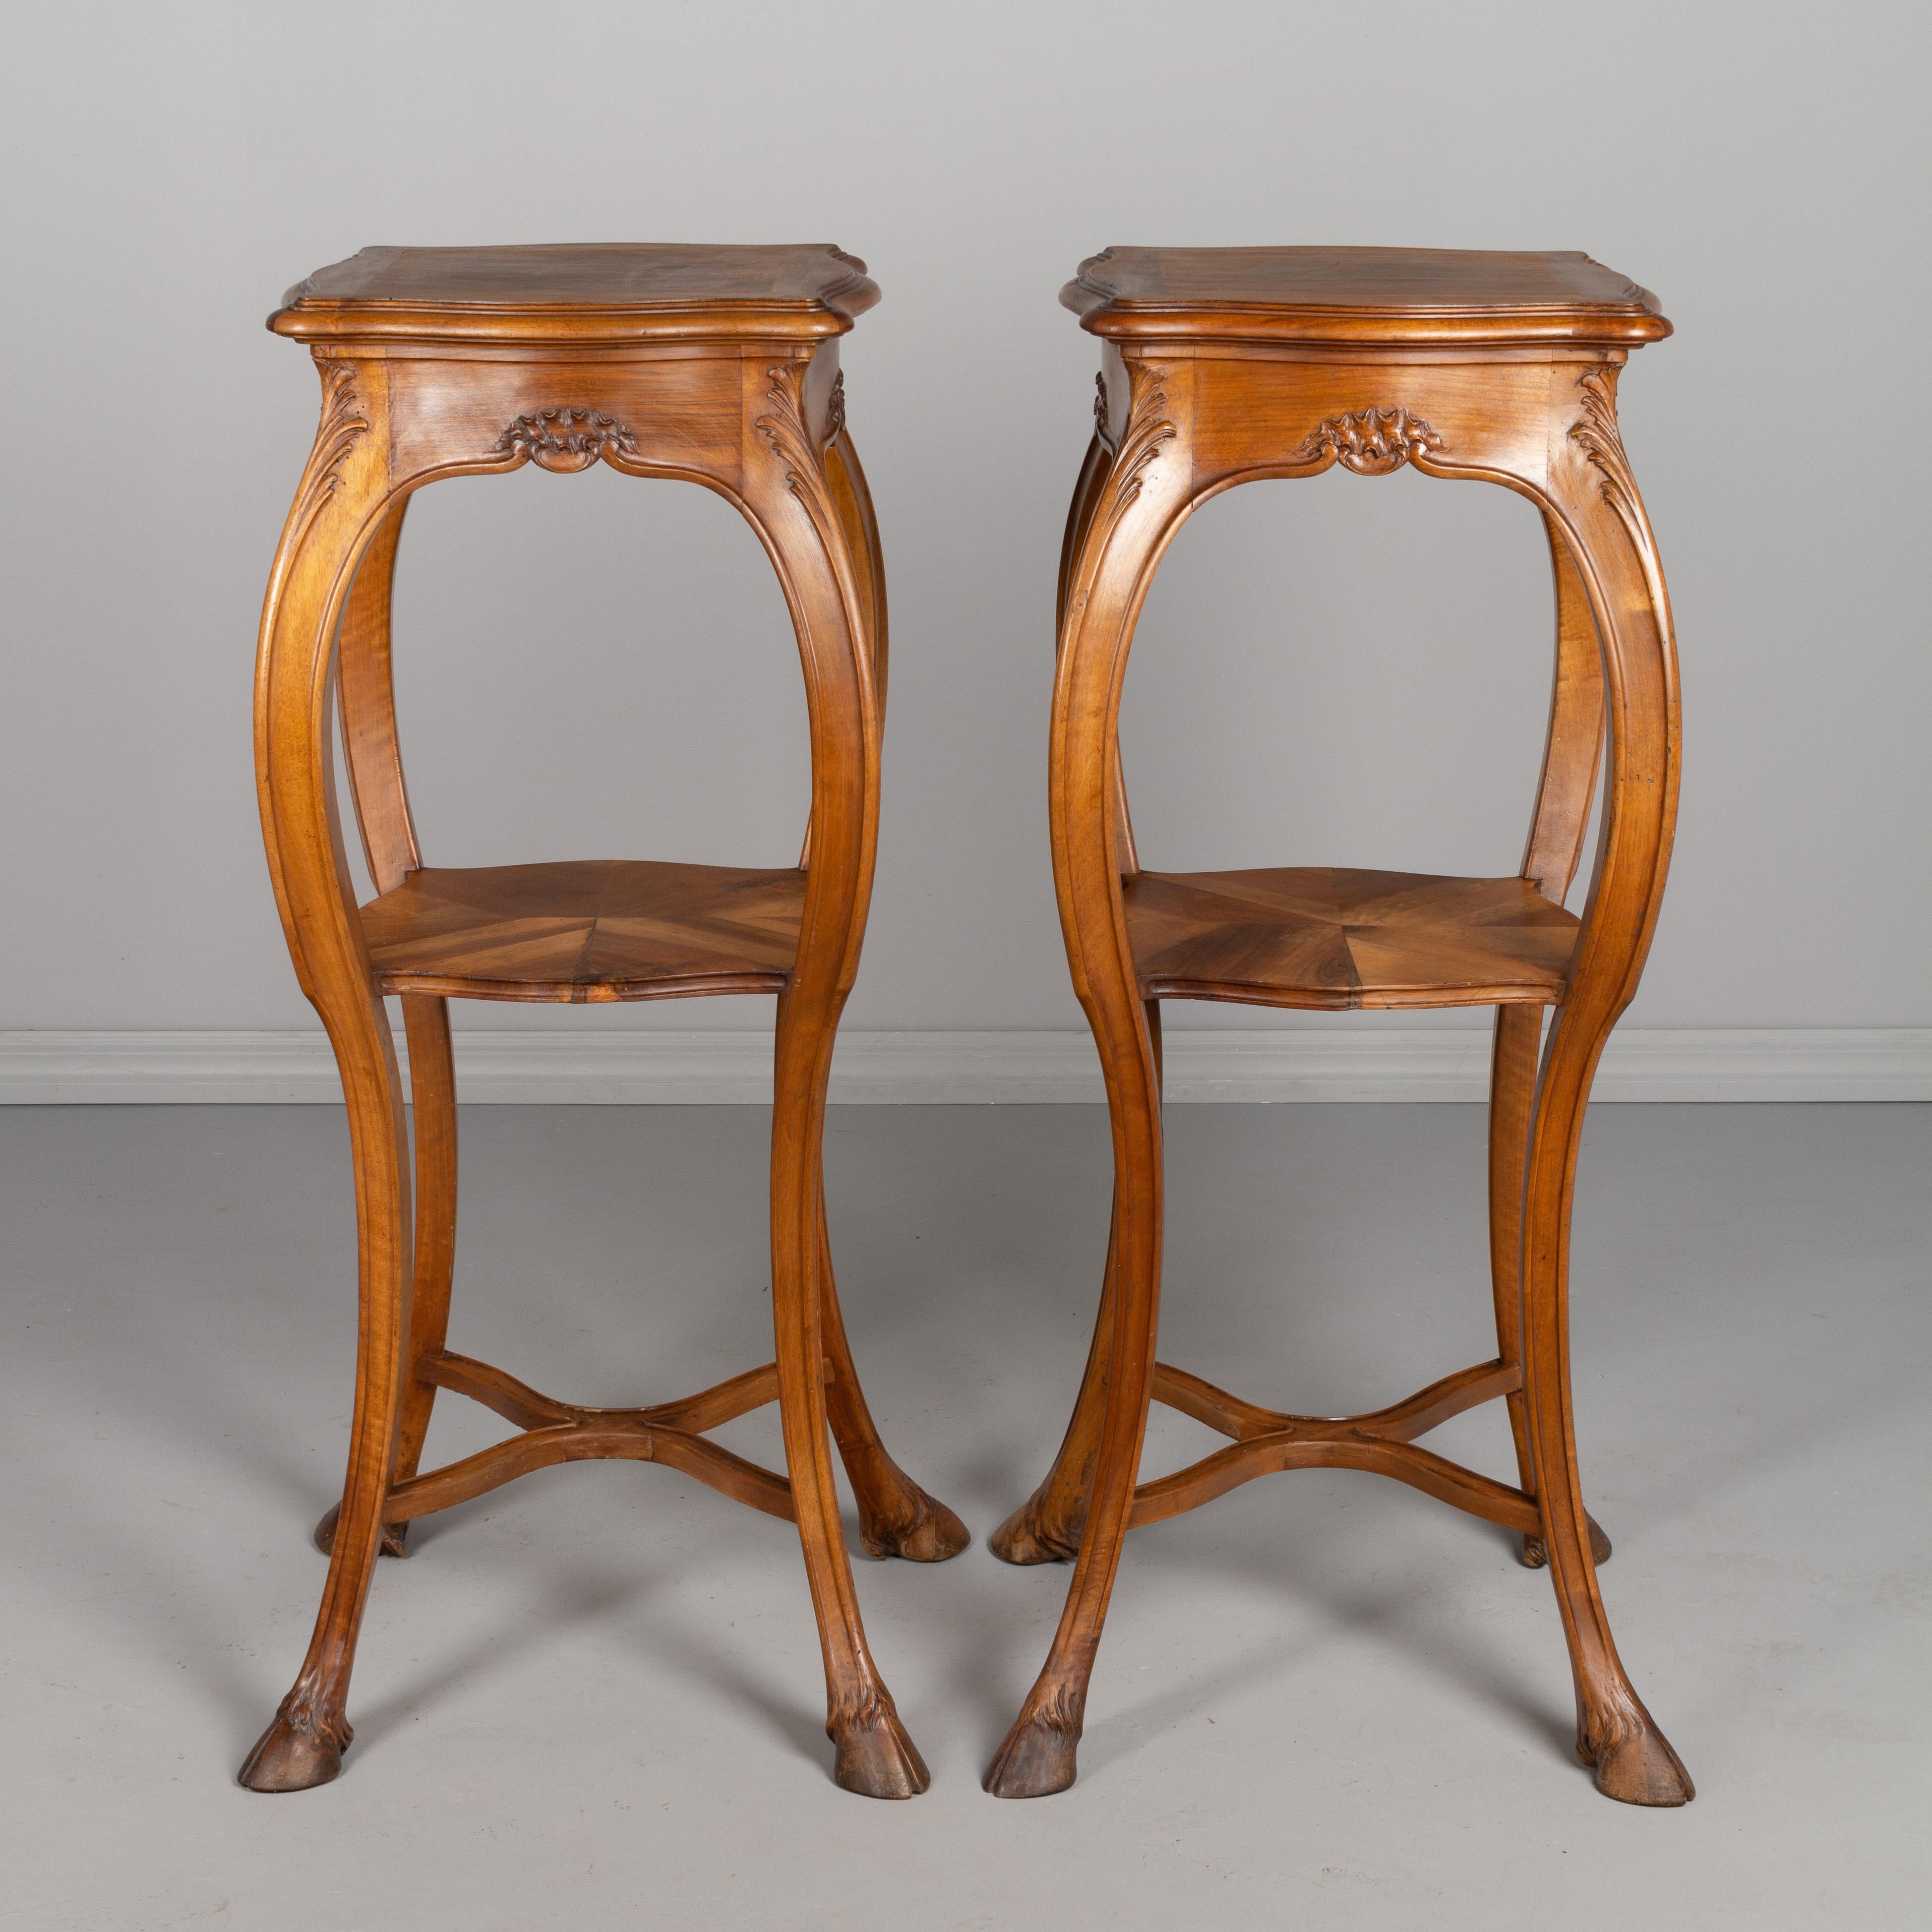 Hand-Carved Pair of French Art Nouveau Sellettes or Tall Pedestals For Sale